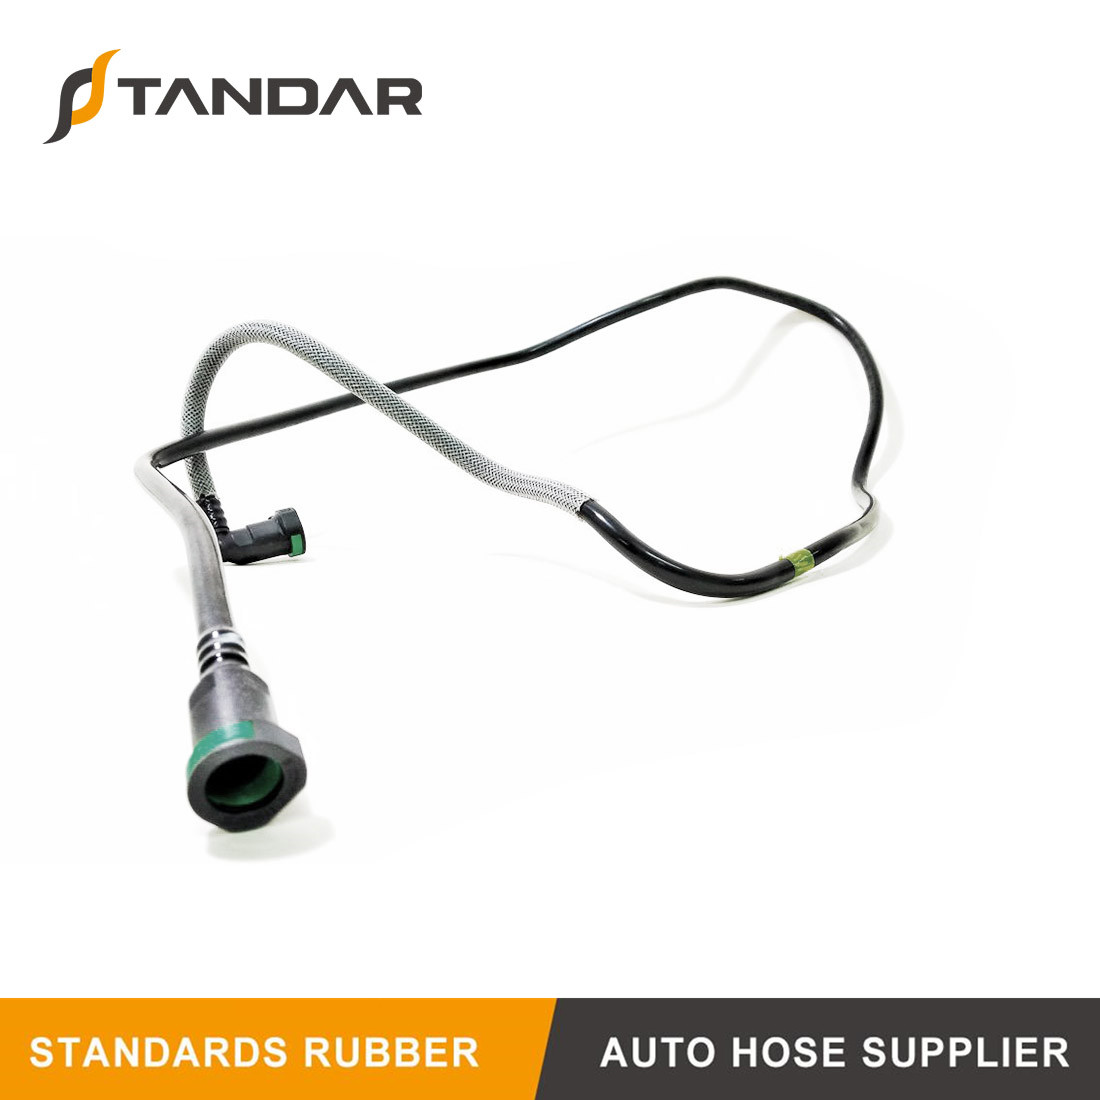 8200199856 Auto Flexible Fuel Hose Pipe Fit For KANGOO EXPRESS